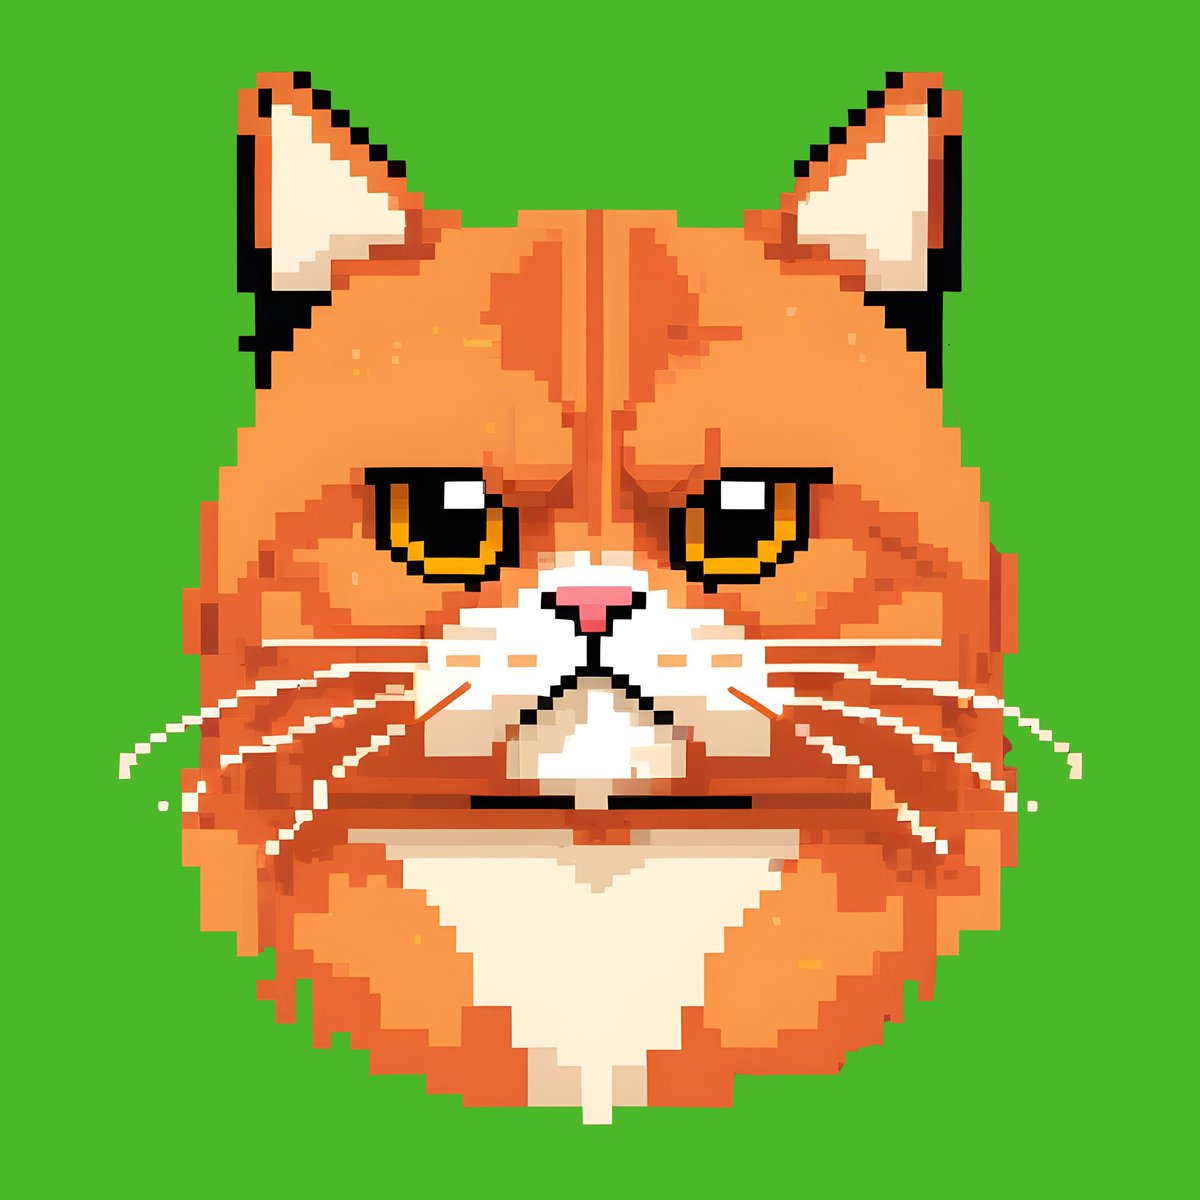 Kind of difficult to create and mint when the internet is always down 😾😾🙀🙀 #Shadow is rightly frustrated!!! 😄😄😄 #NFT #nftart #internetdown #pixelart